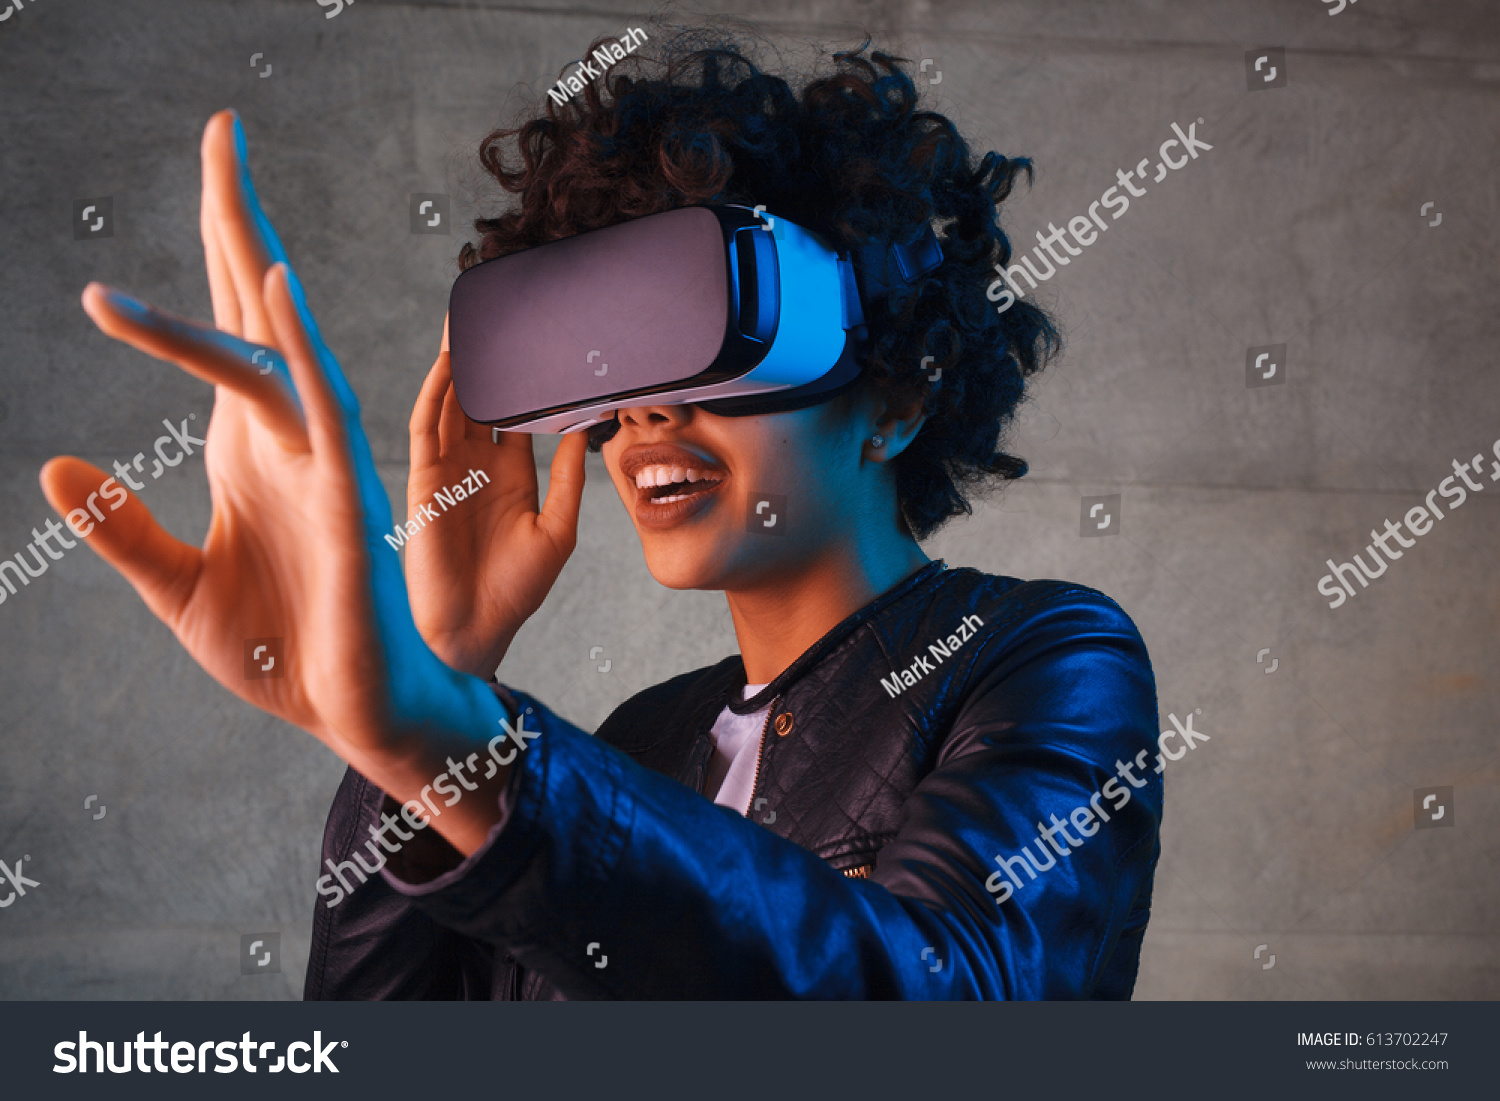 Amazed young woman touching the air during the VR experience. Horizontal studio shot. #613702247